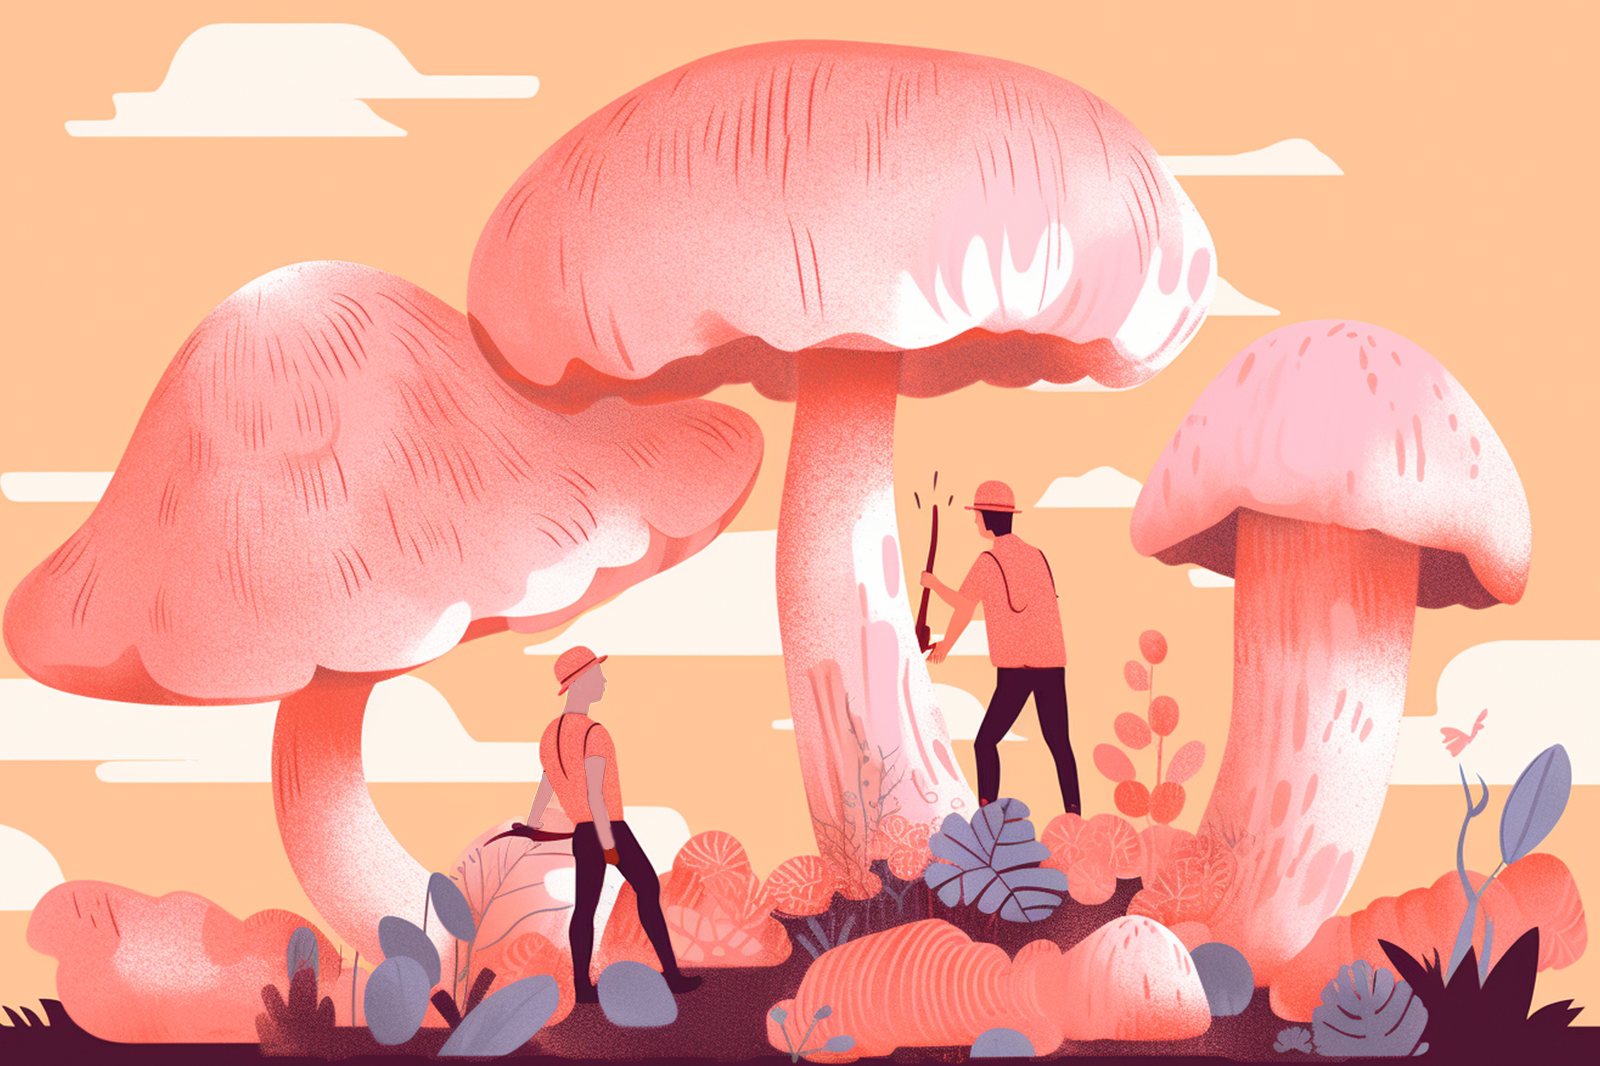 Three big pink mushrooms, a man cutting one, another standing beside, with peach background in a fantasy scene